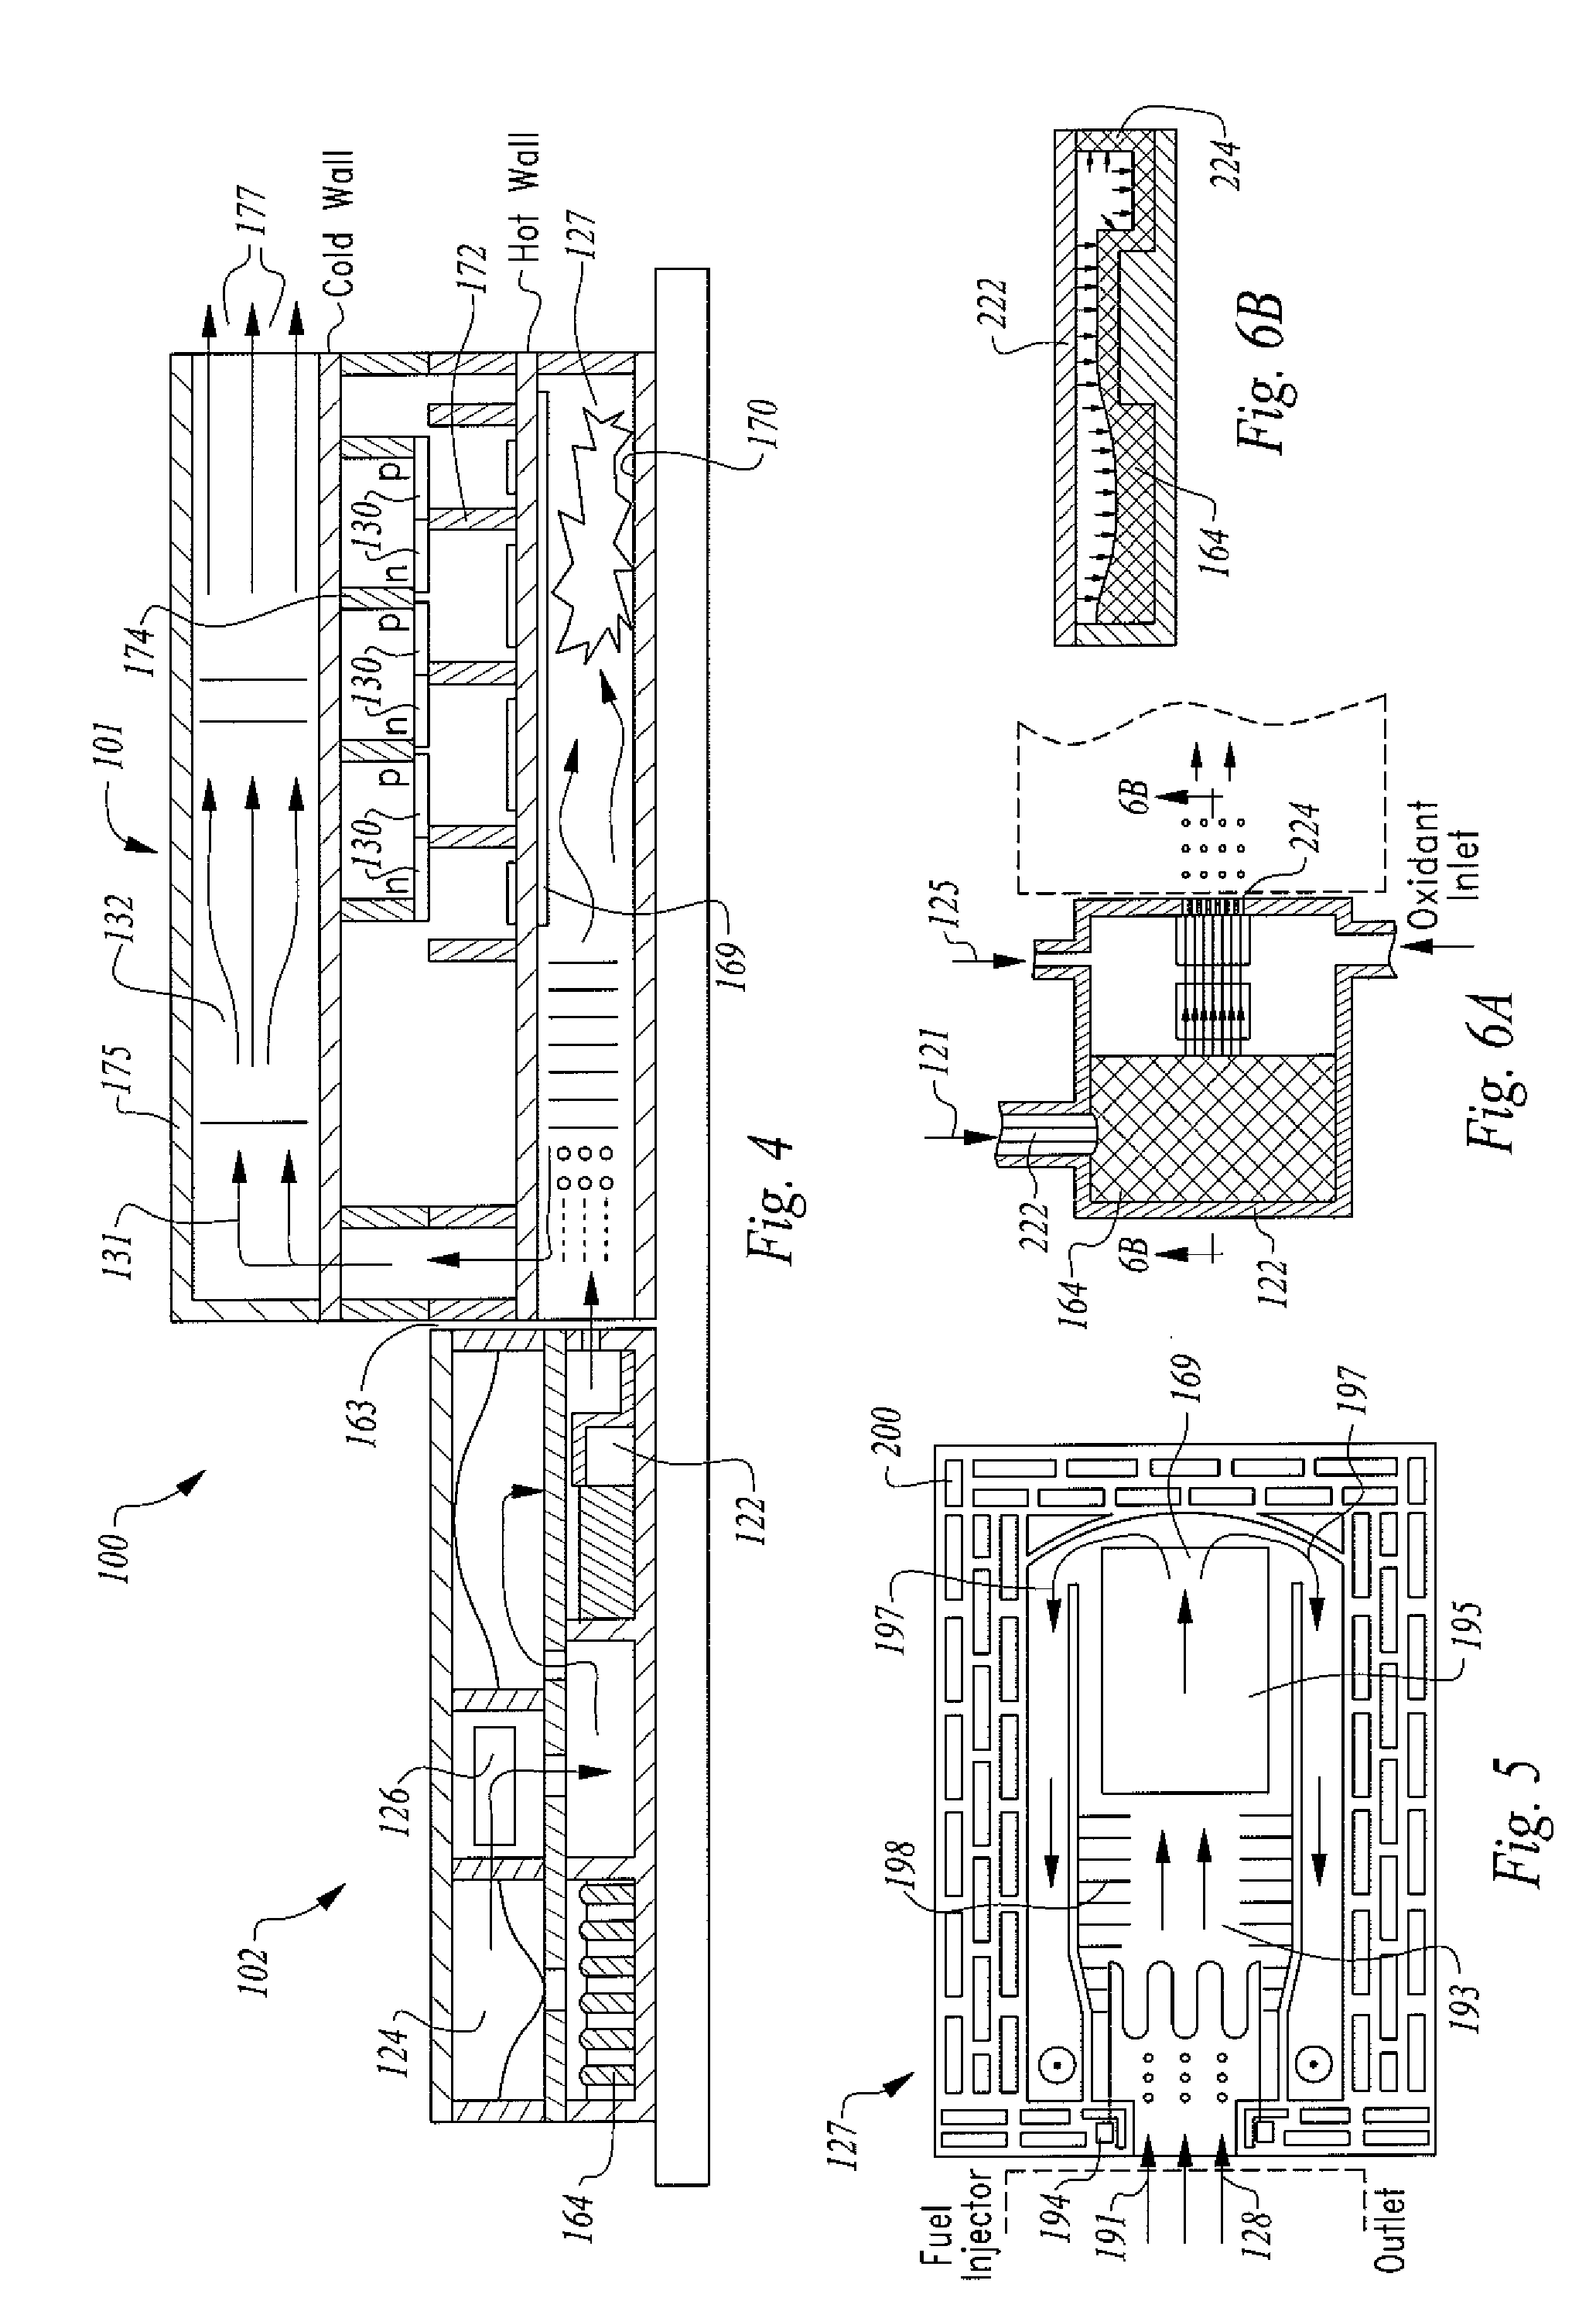 Energy-Efficient Micro-Combustion System for Power Generation and Fuel Processing